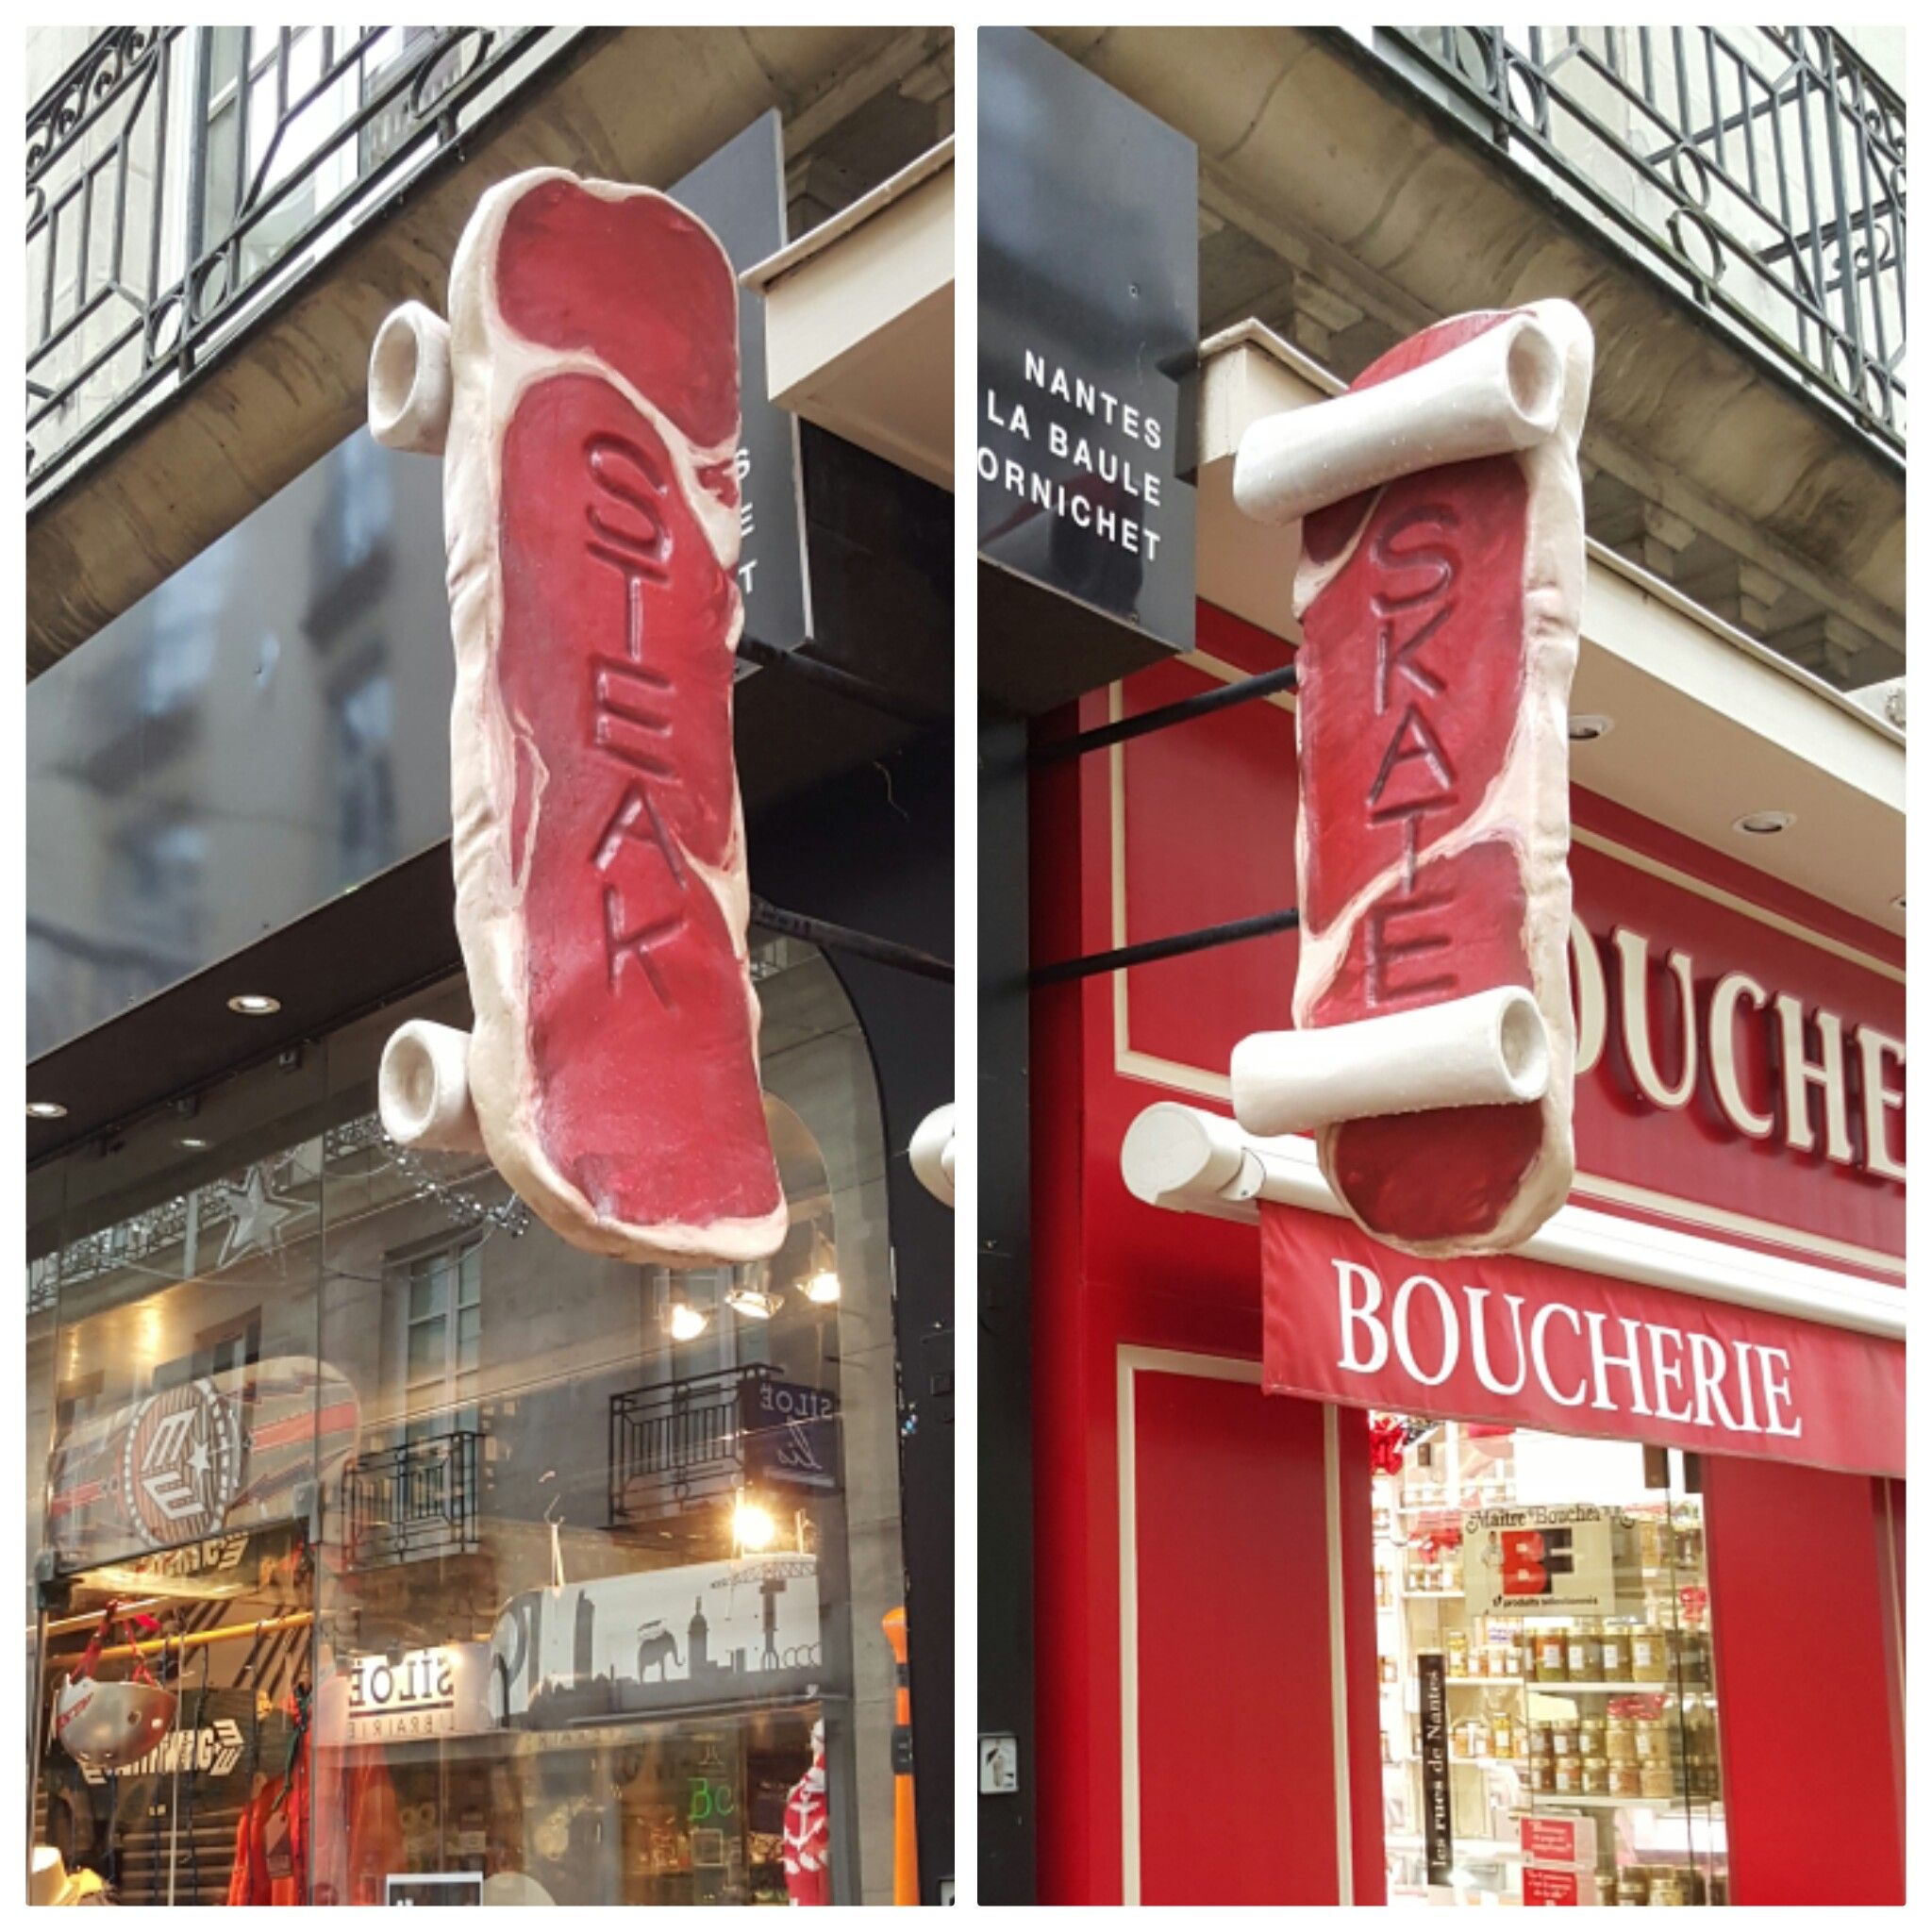 This sign shared between a butcher shop and a skate shop in Nantes, France